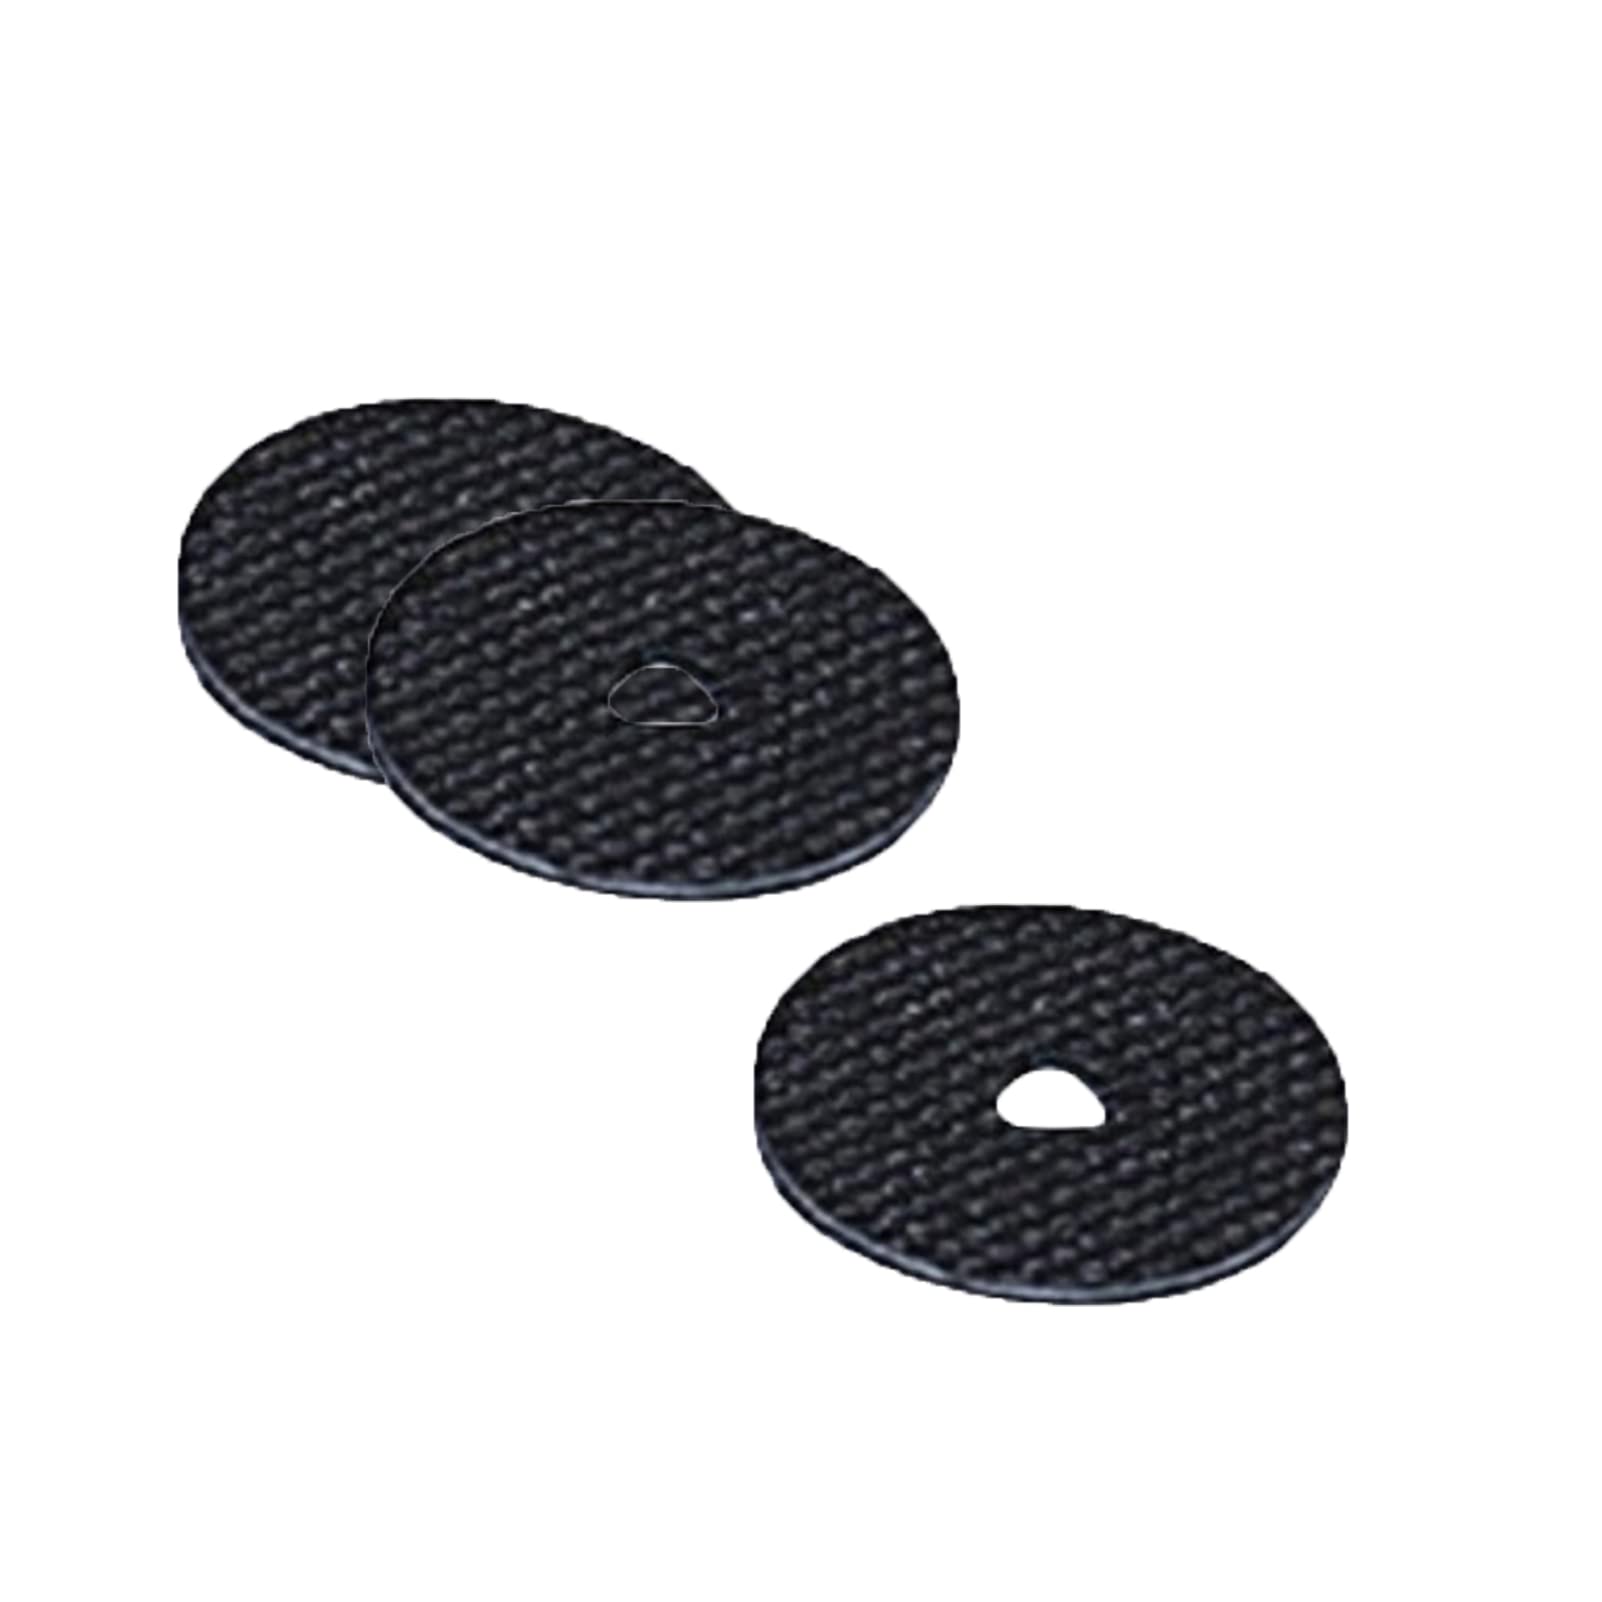 Yundxi 3 Pieces Smooth Carbon Fiber Drag Washers Replacement Parts